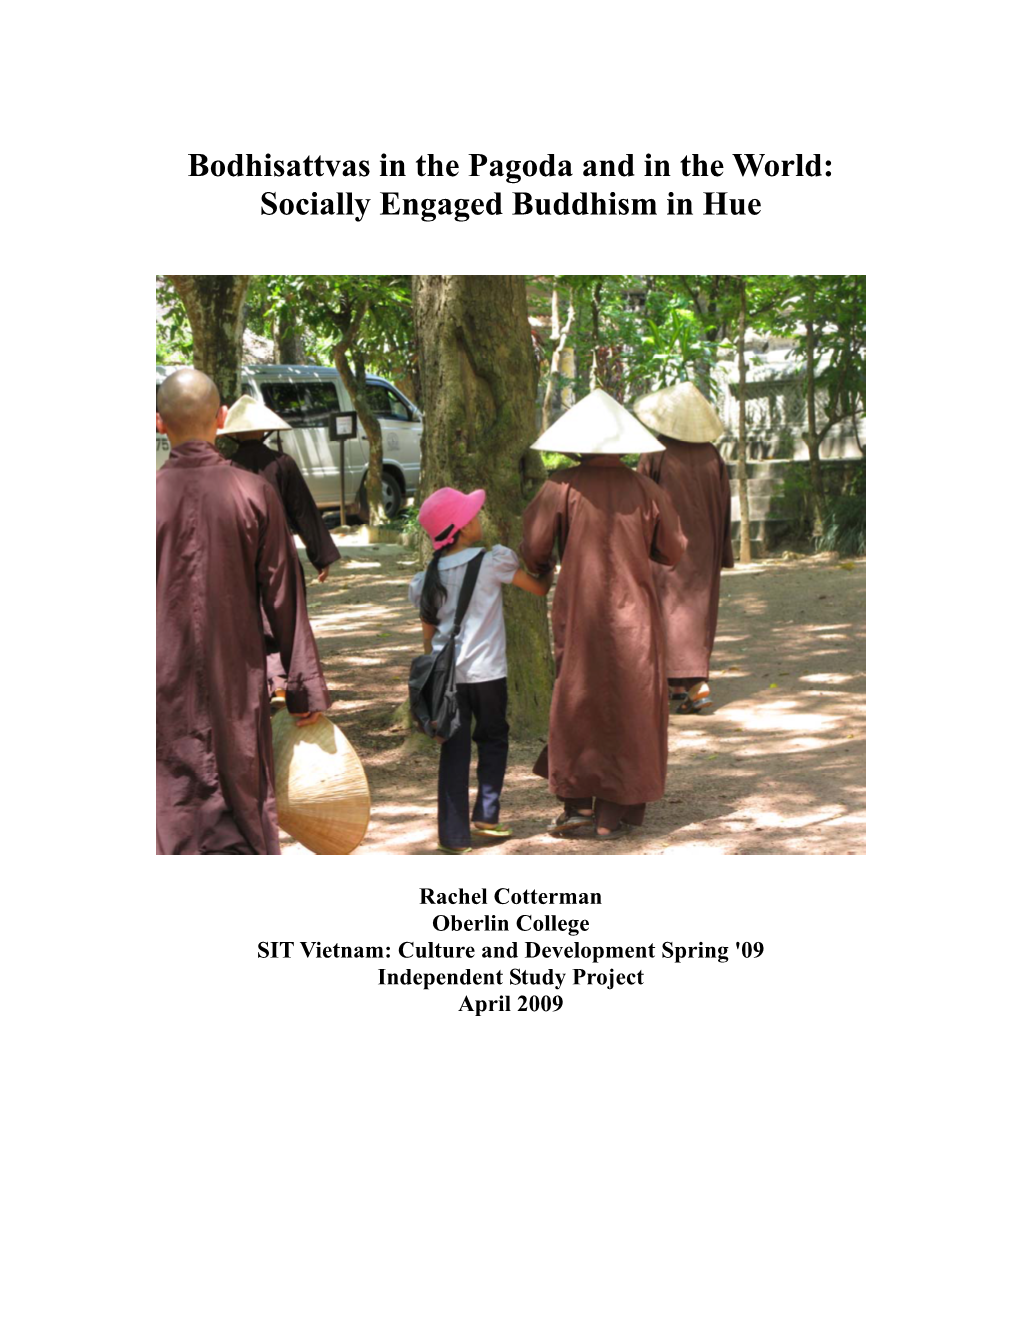 Bodhisattvas in the Pagoda and in the World: Socially Engaged Buddhism in Hue